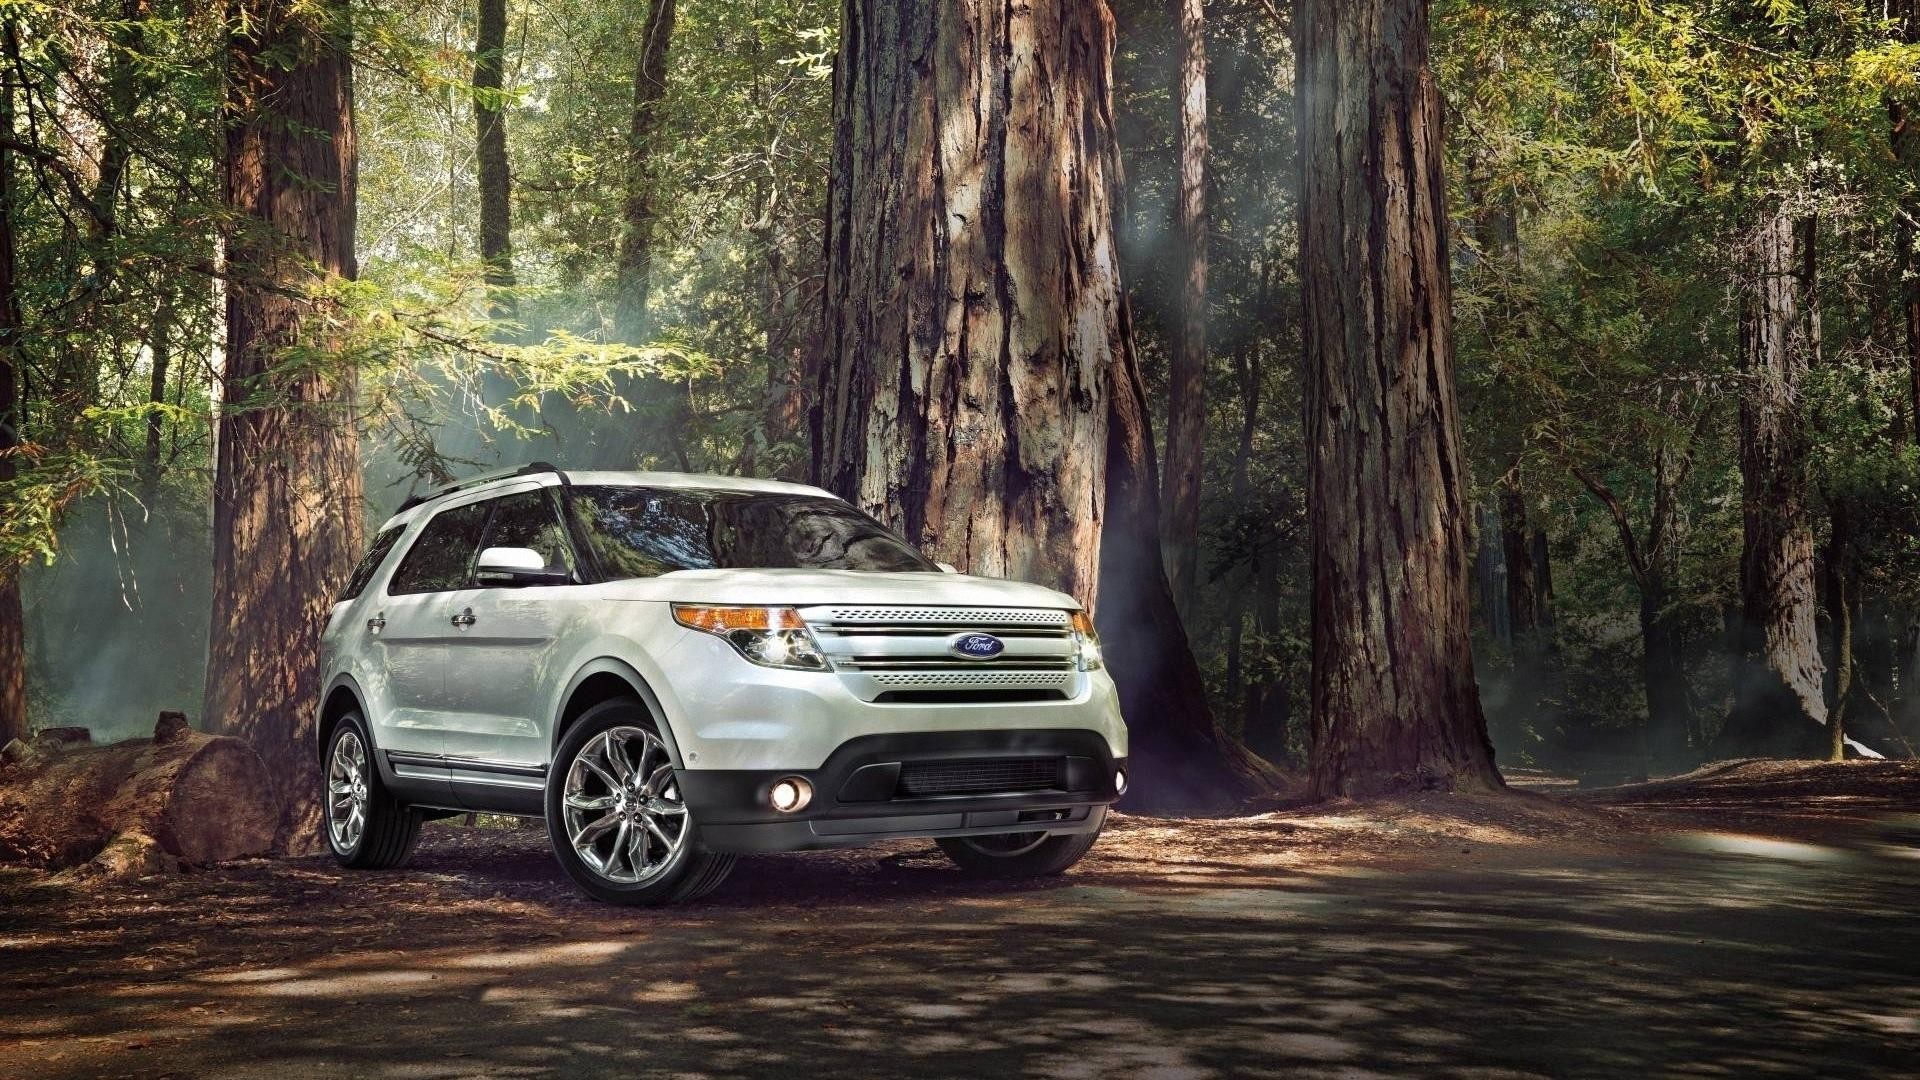 Ford Car Ford Explorer Forest Tree Trunk White Cars 1920x1080